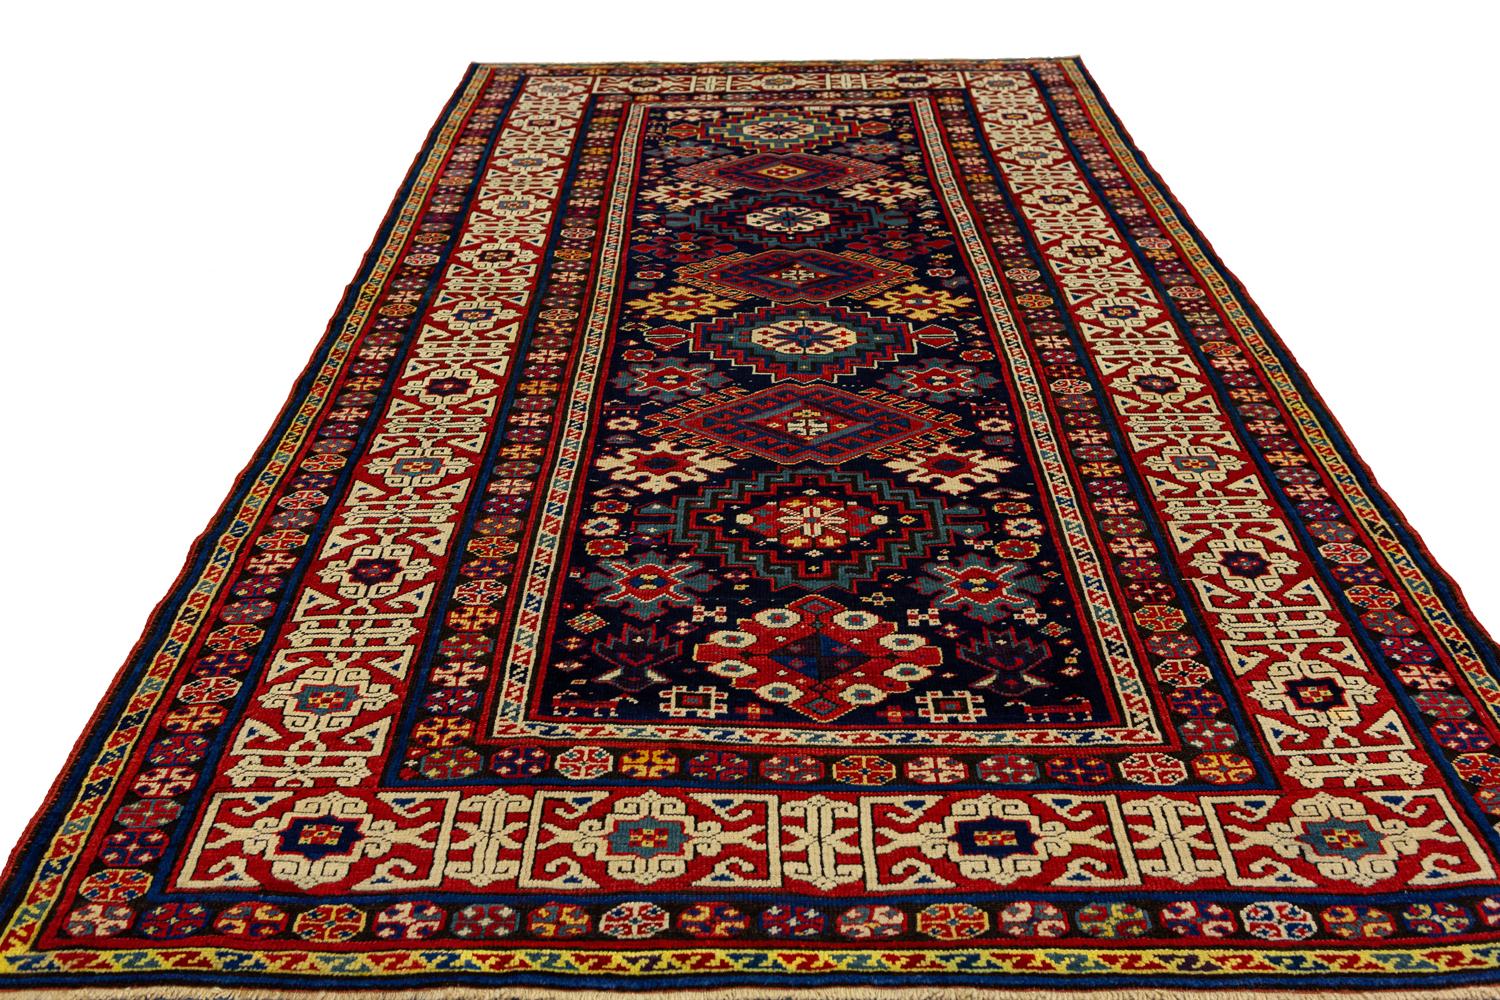 This Antique Caucasian Kuba Rug is a must have for any antique collector or lover of beautiful things! The bold design and rich colors make it a statement piece that will be admired by all who see it. It would add a touch of elegance to any room,